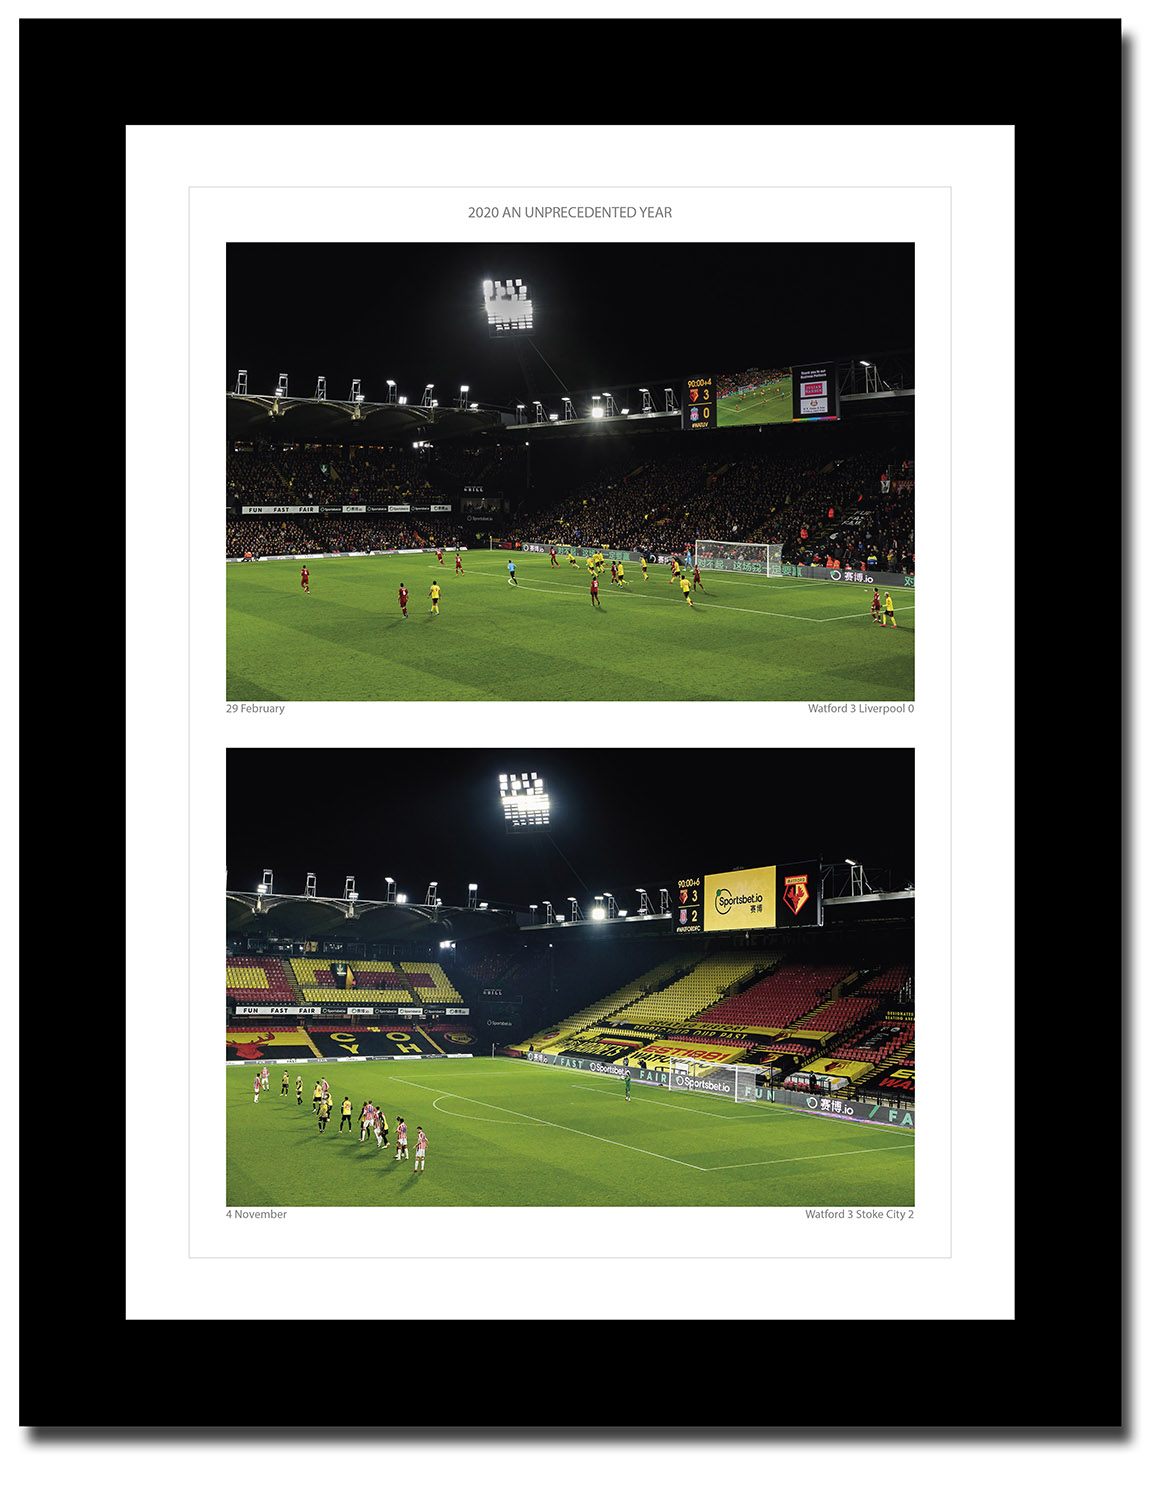 Framed print of Watford FC in the pandemic